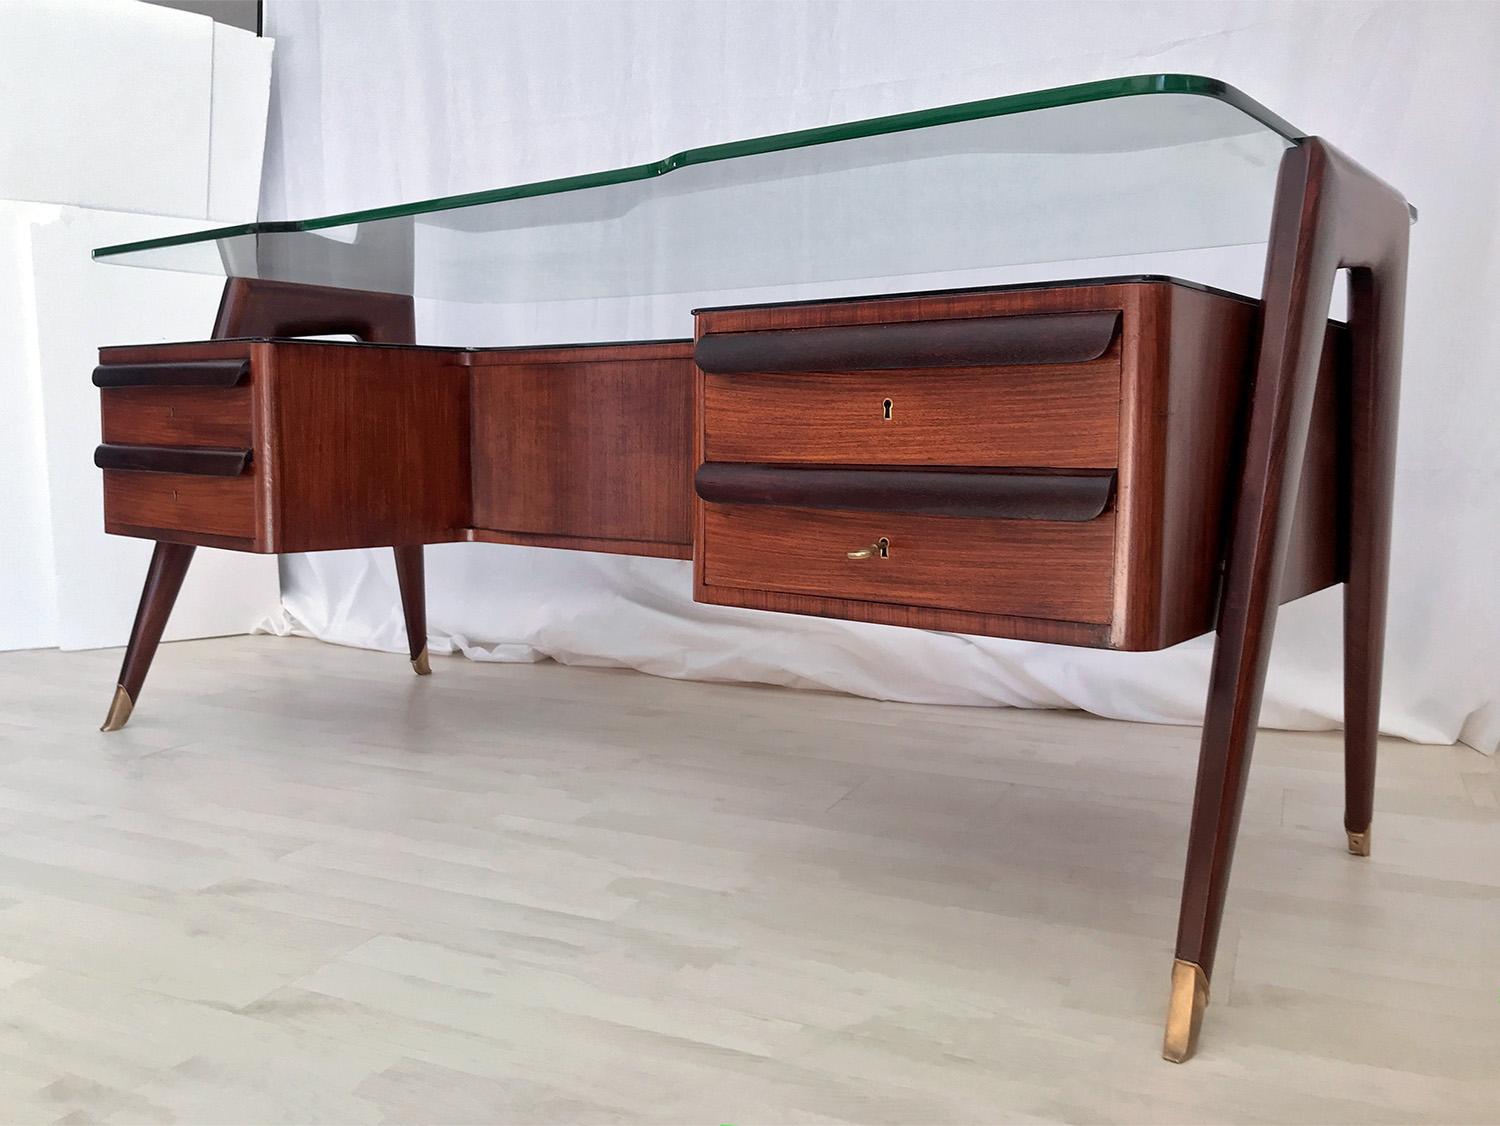 This stunning and impressive Italian executive Desk is one of the masterpieces of the Italian designer Vittorio Dassi, a model type produced in Italy in the 1950s and specifically dedicated to an audience formed by professionals and senior